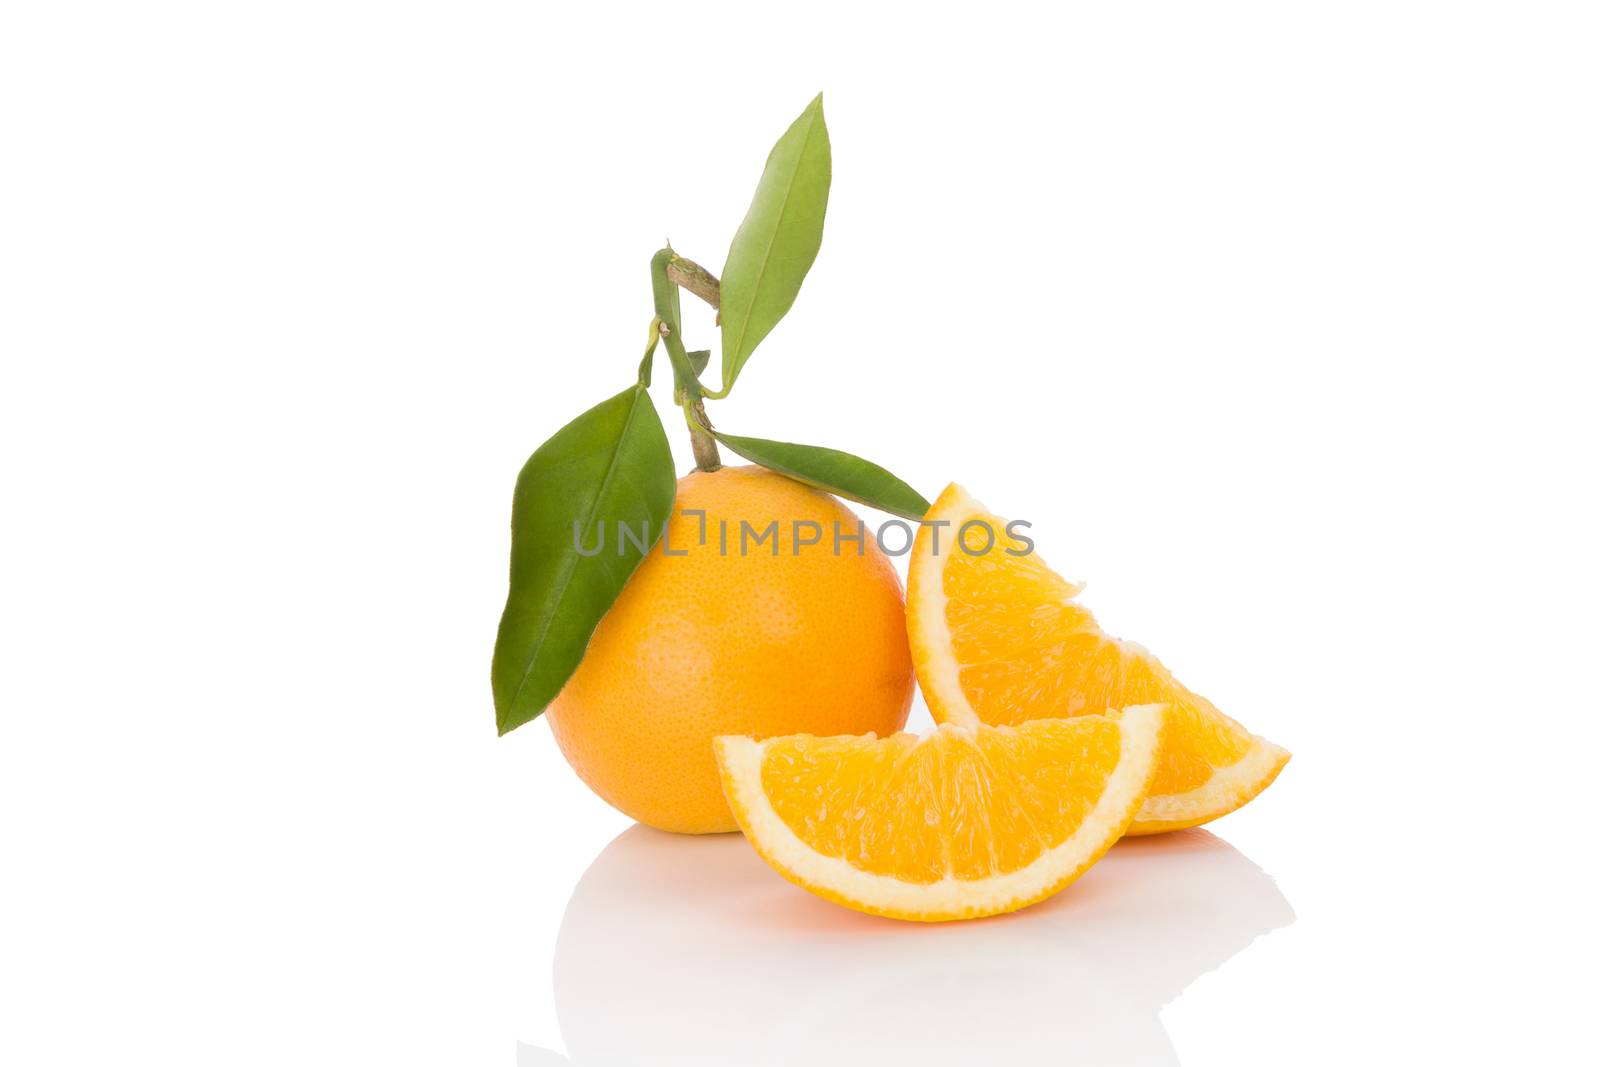 Delicious whole oranges with leaves and slices isolated on white background. Healthy fruit eating. 